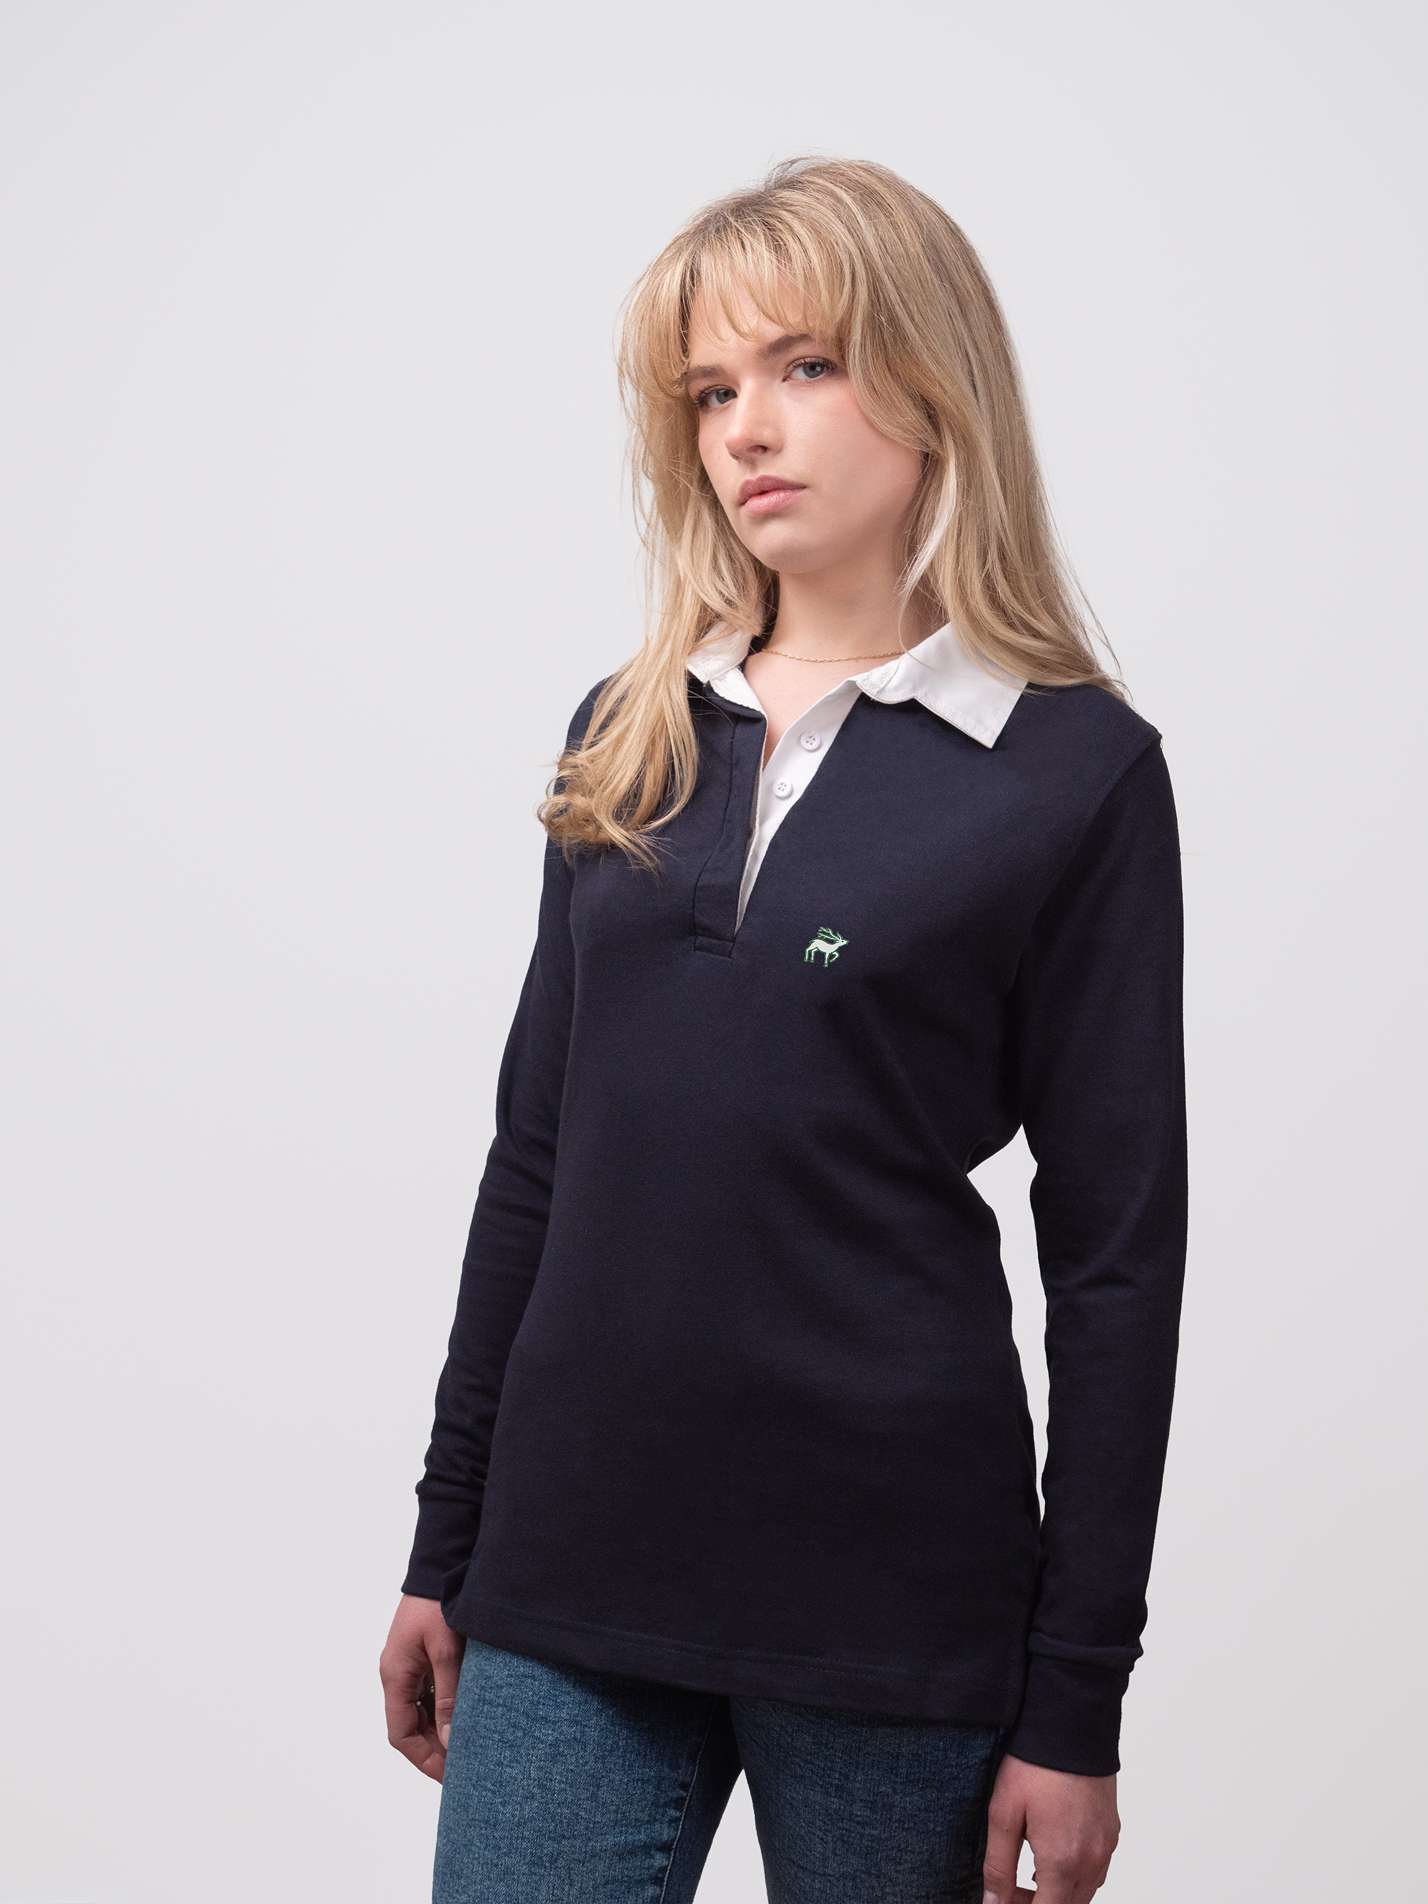 Jesus College Oxford Stag Logo Classic Ladies Rugby Shirt